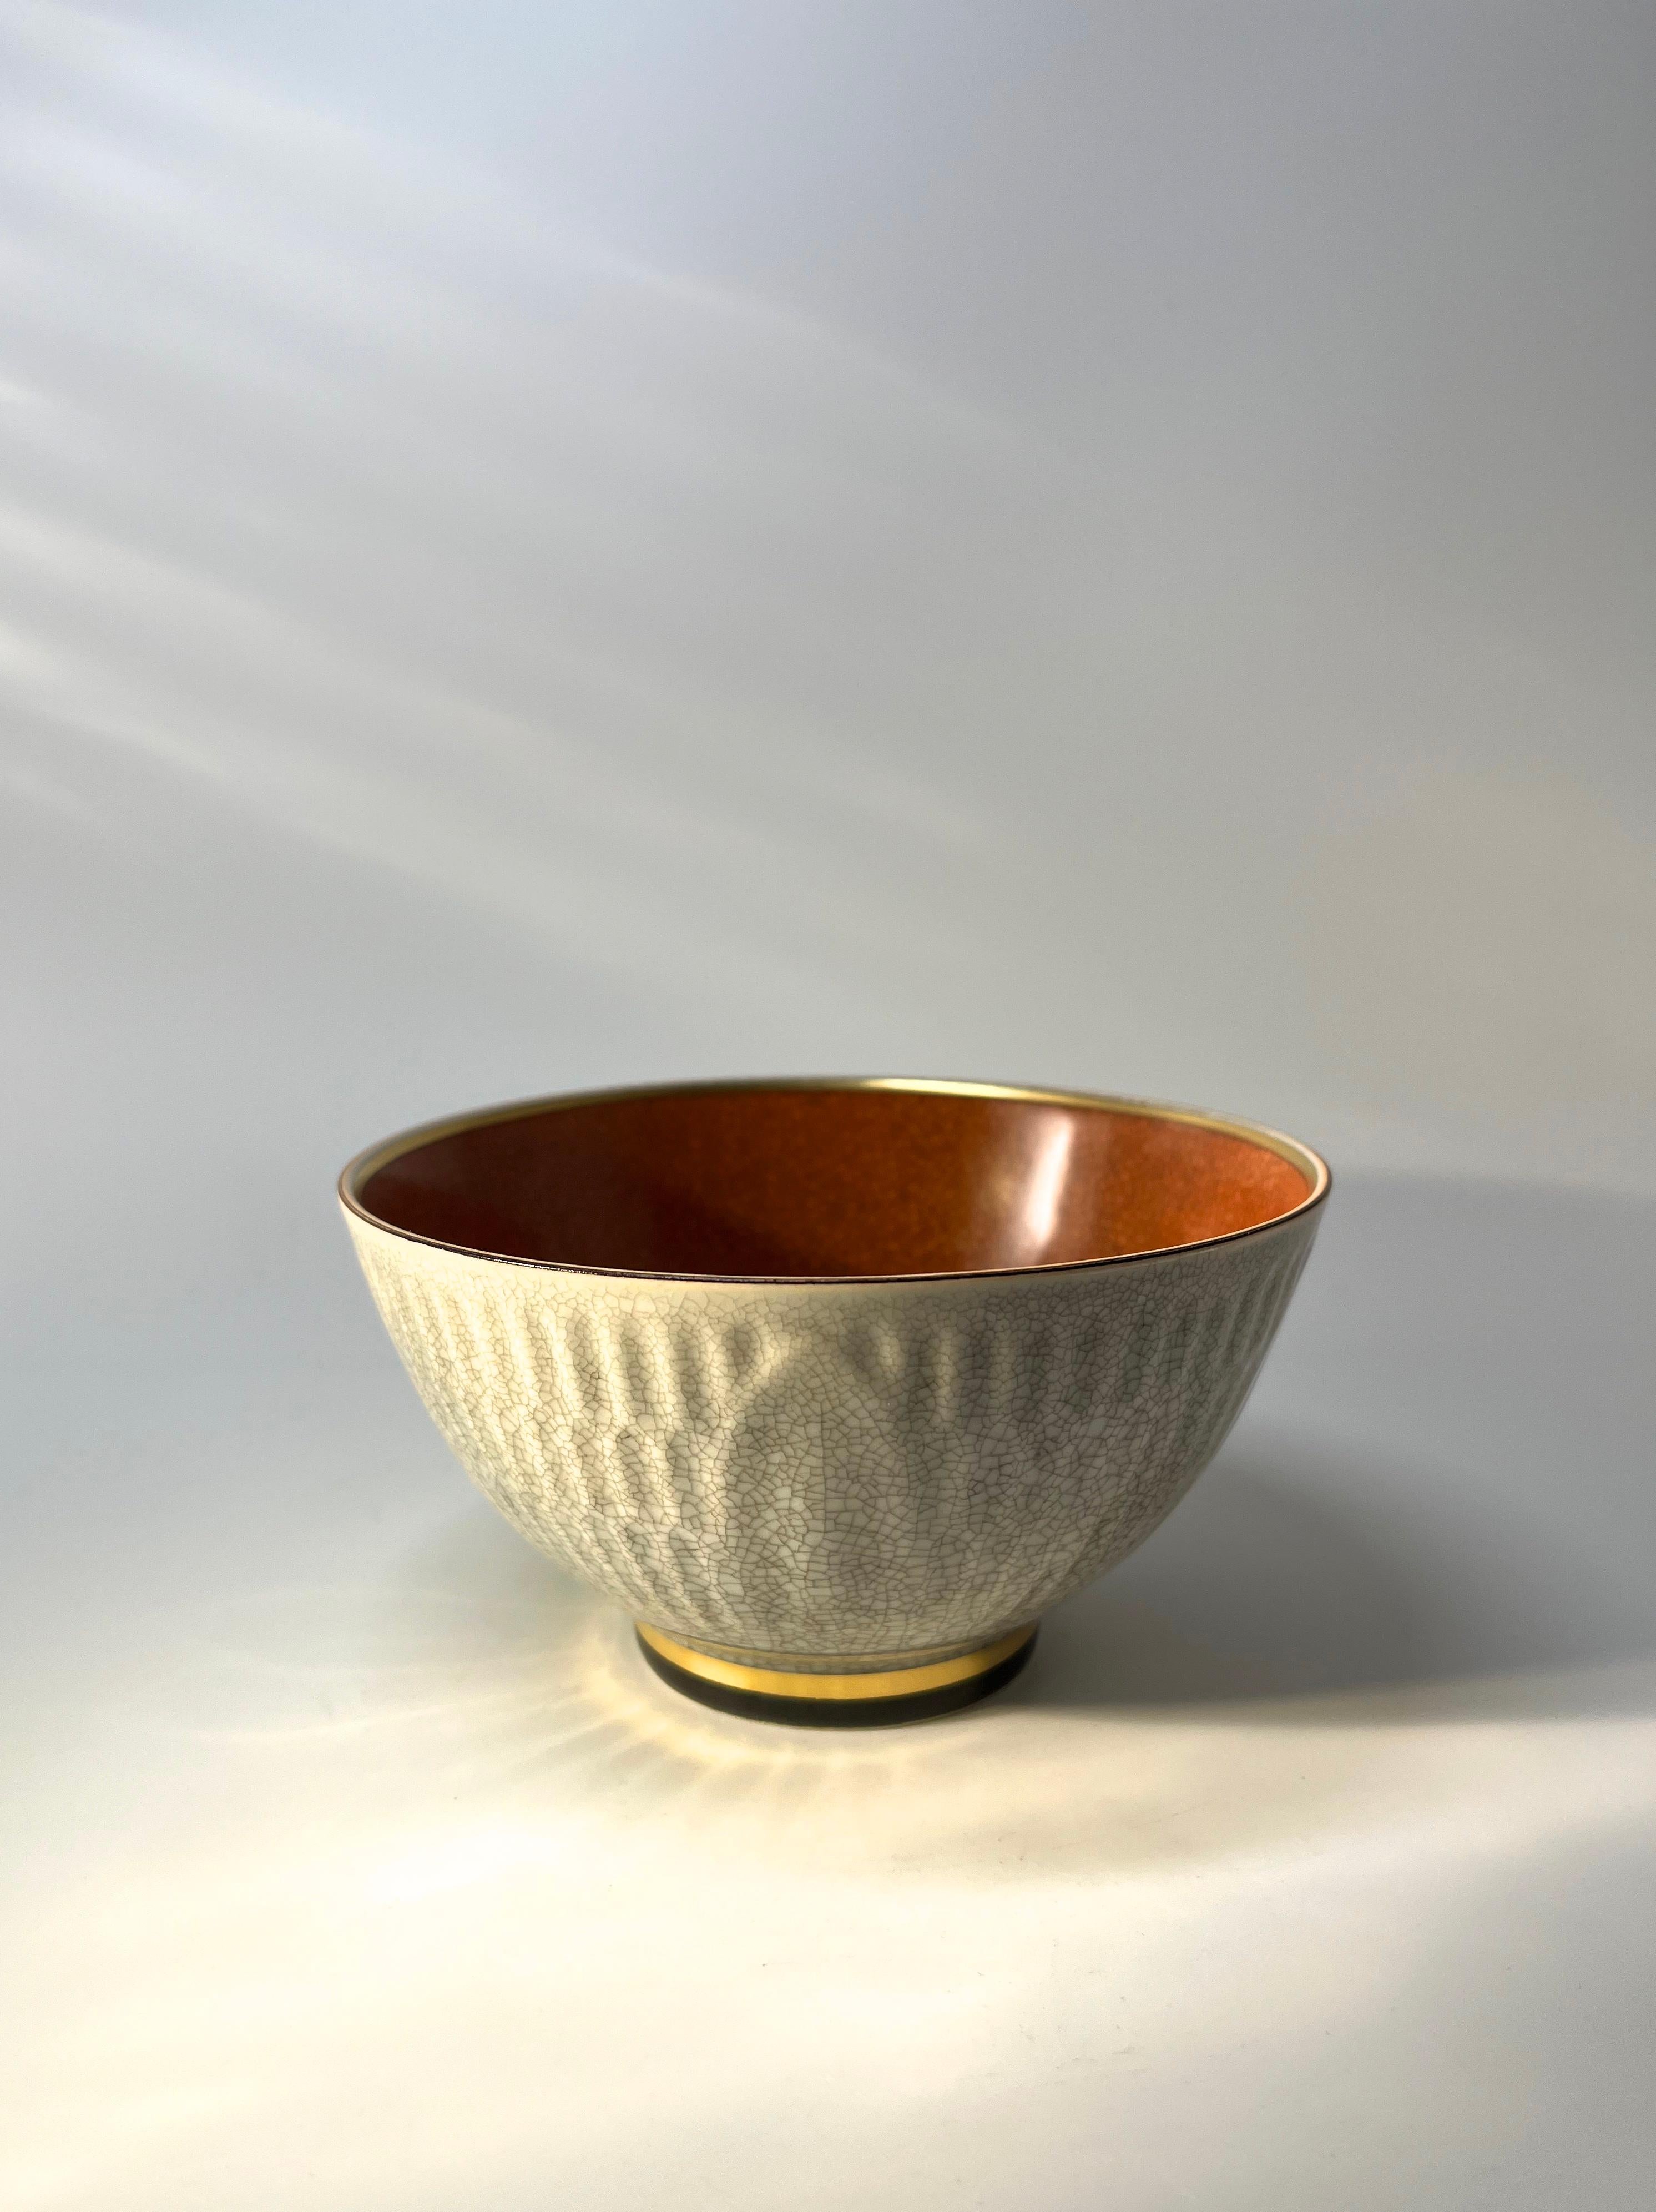 Decorative Royal Copenhagen porcelain bowl designed by Thorkild Olsen
Grey crackle glaze in relief to exterior, featuring a broad gilded band around plinth. 
Rich terratcotta crackle glaze interior
Circa 1955
Stamped and numbered 3431
Height 2.75